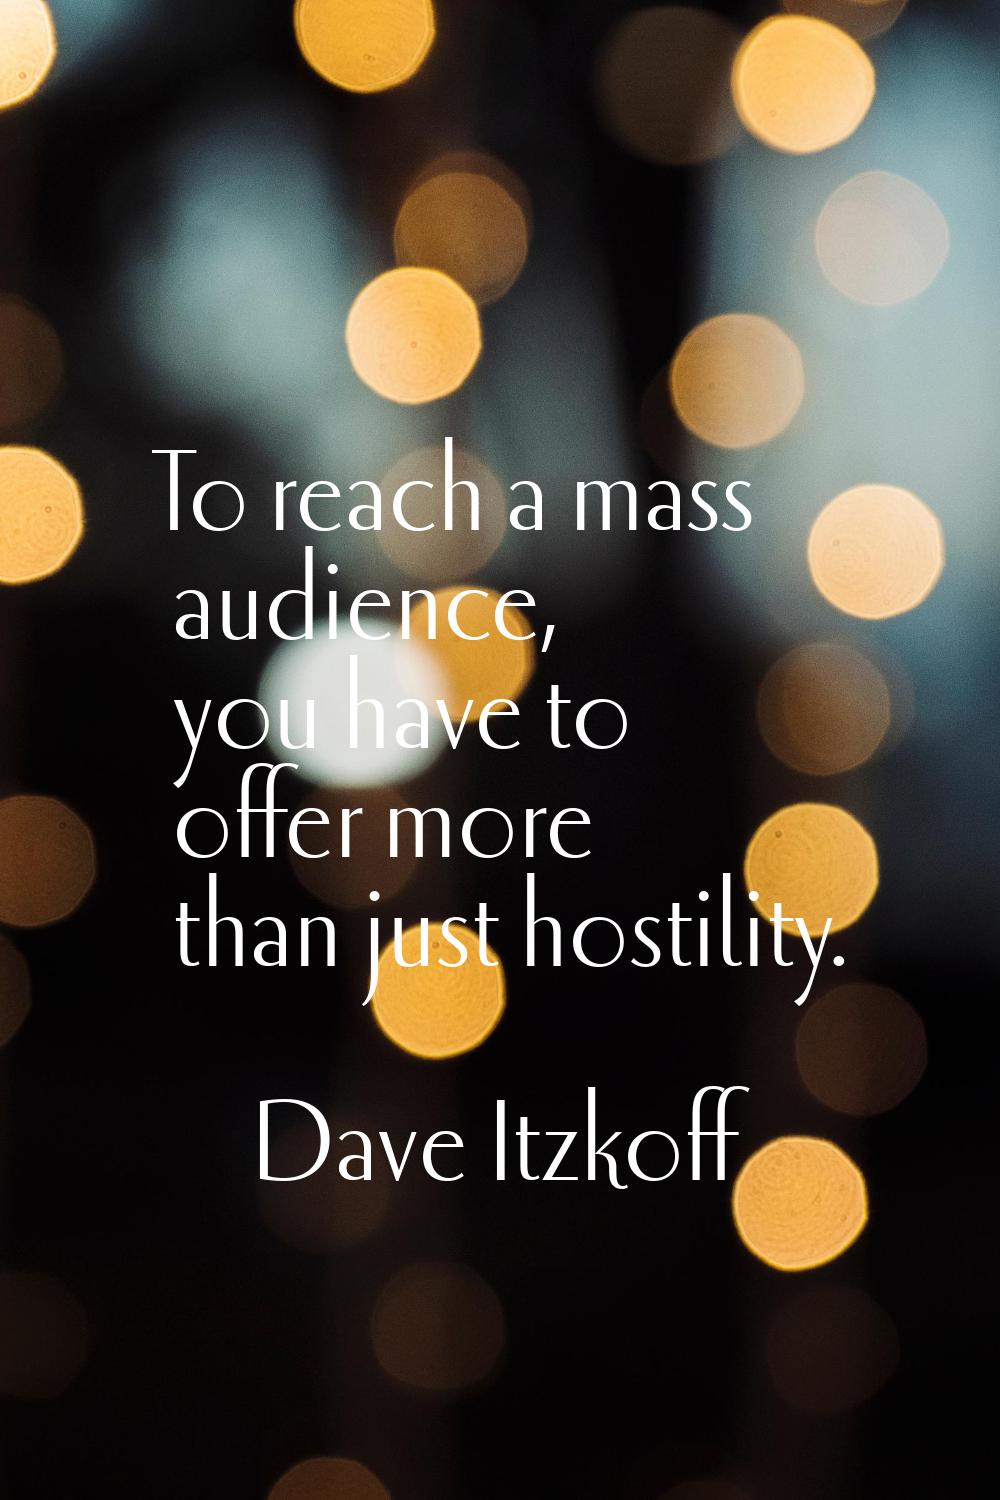 To reach a mass audience, you have to offer more than just hostility.